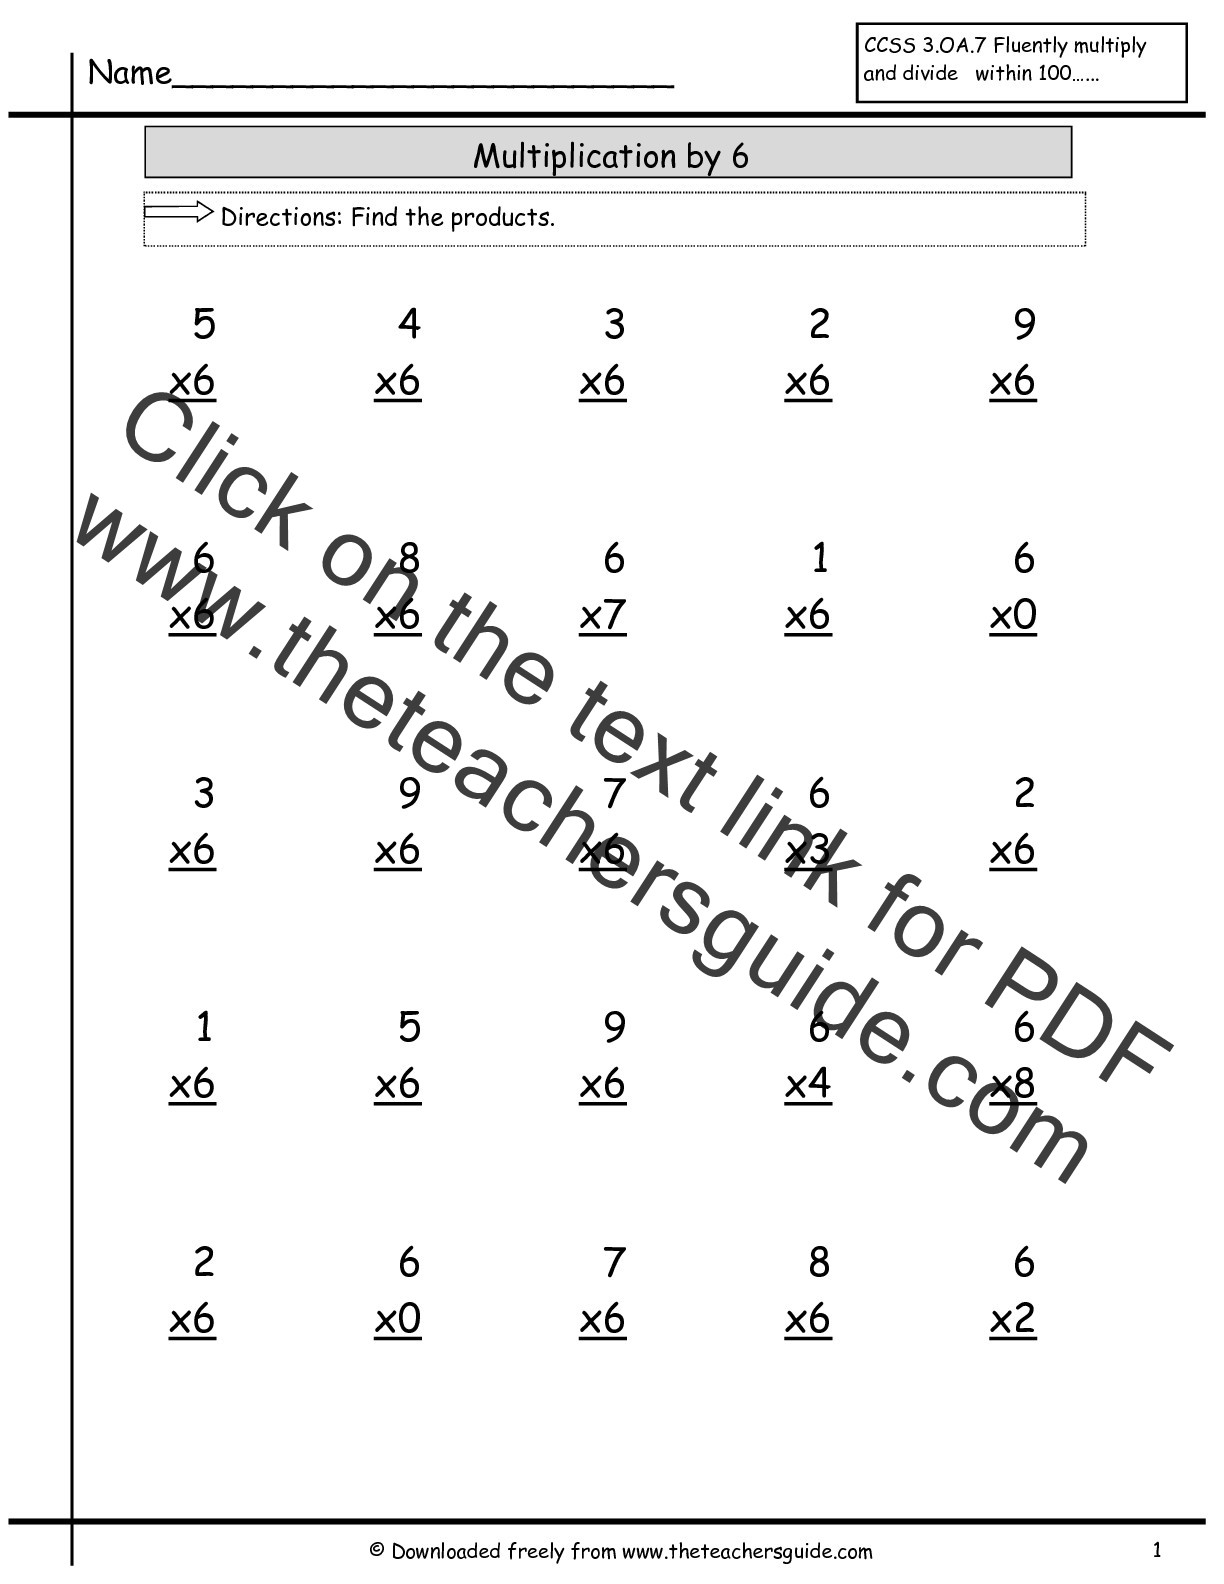 Multiplying by 6 Worksheet Multiplication Facts Worksheets From the Teacher S Guide